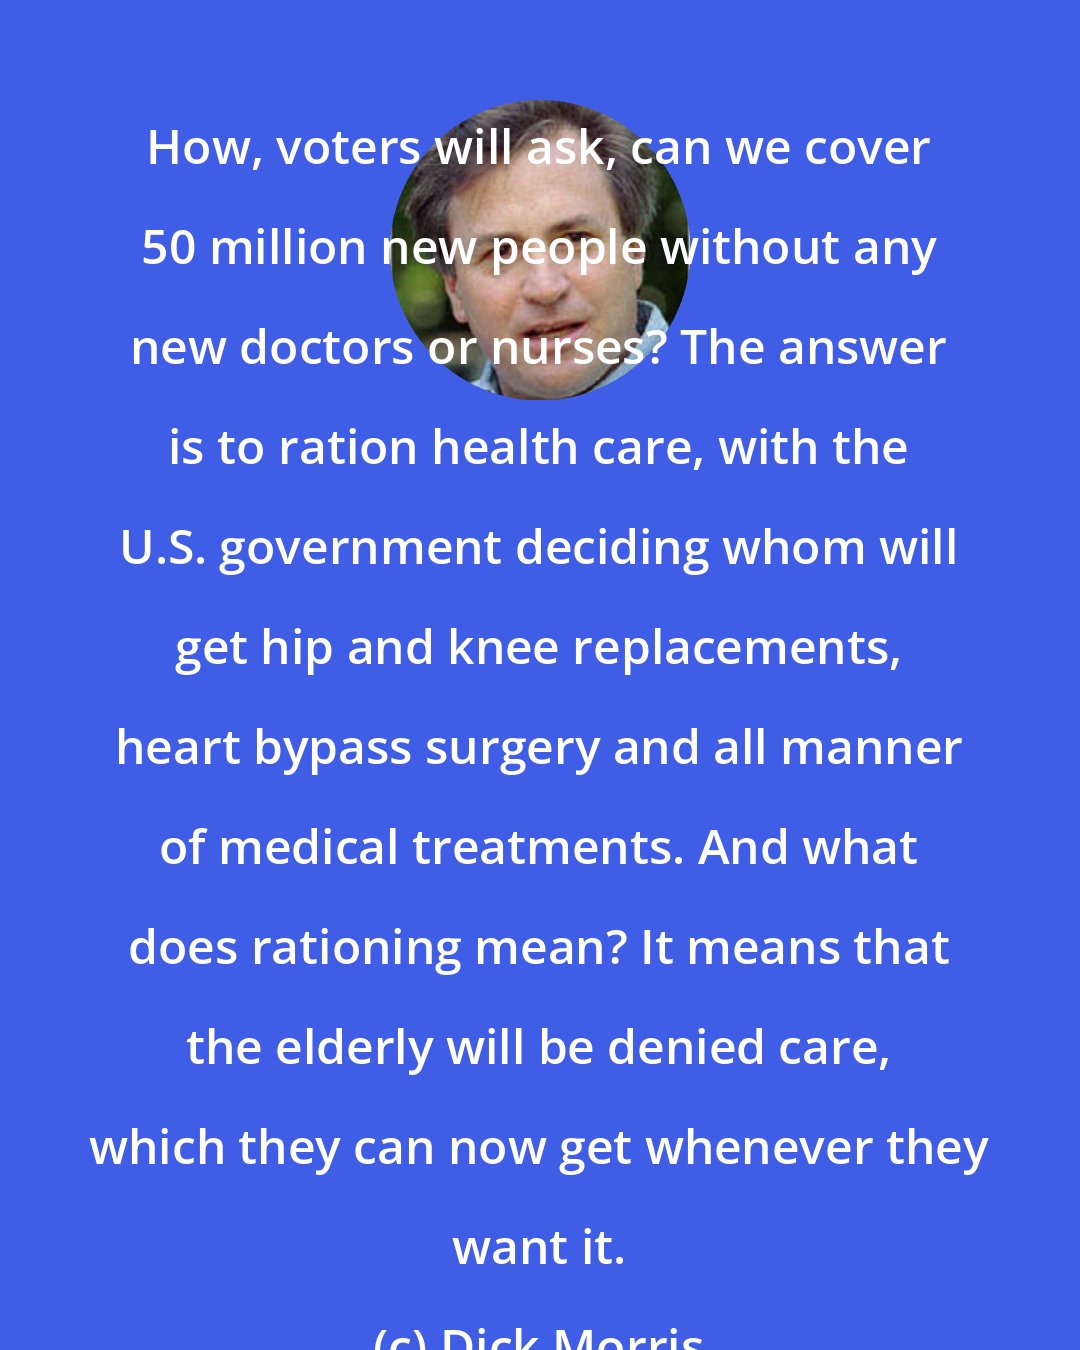 Dick Morris: How, voters will ask, can we cover 50 million new people without any new doctors or nurses? The answer is to ration health care, with the U.S. government deciding whom will get hip and knee replacements, heart bypass surgery and all manner of medical treatments. And what does rationing mean? It means that the elderly will be denied care, which they can now get whenever they want it.